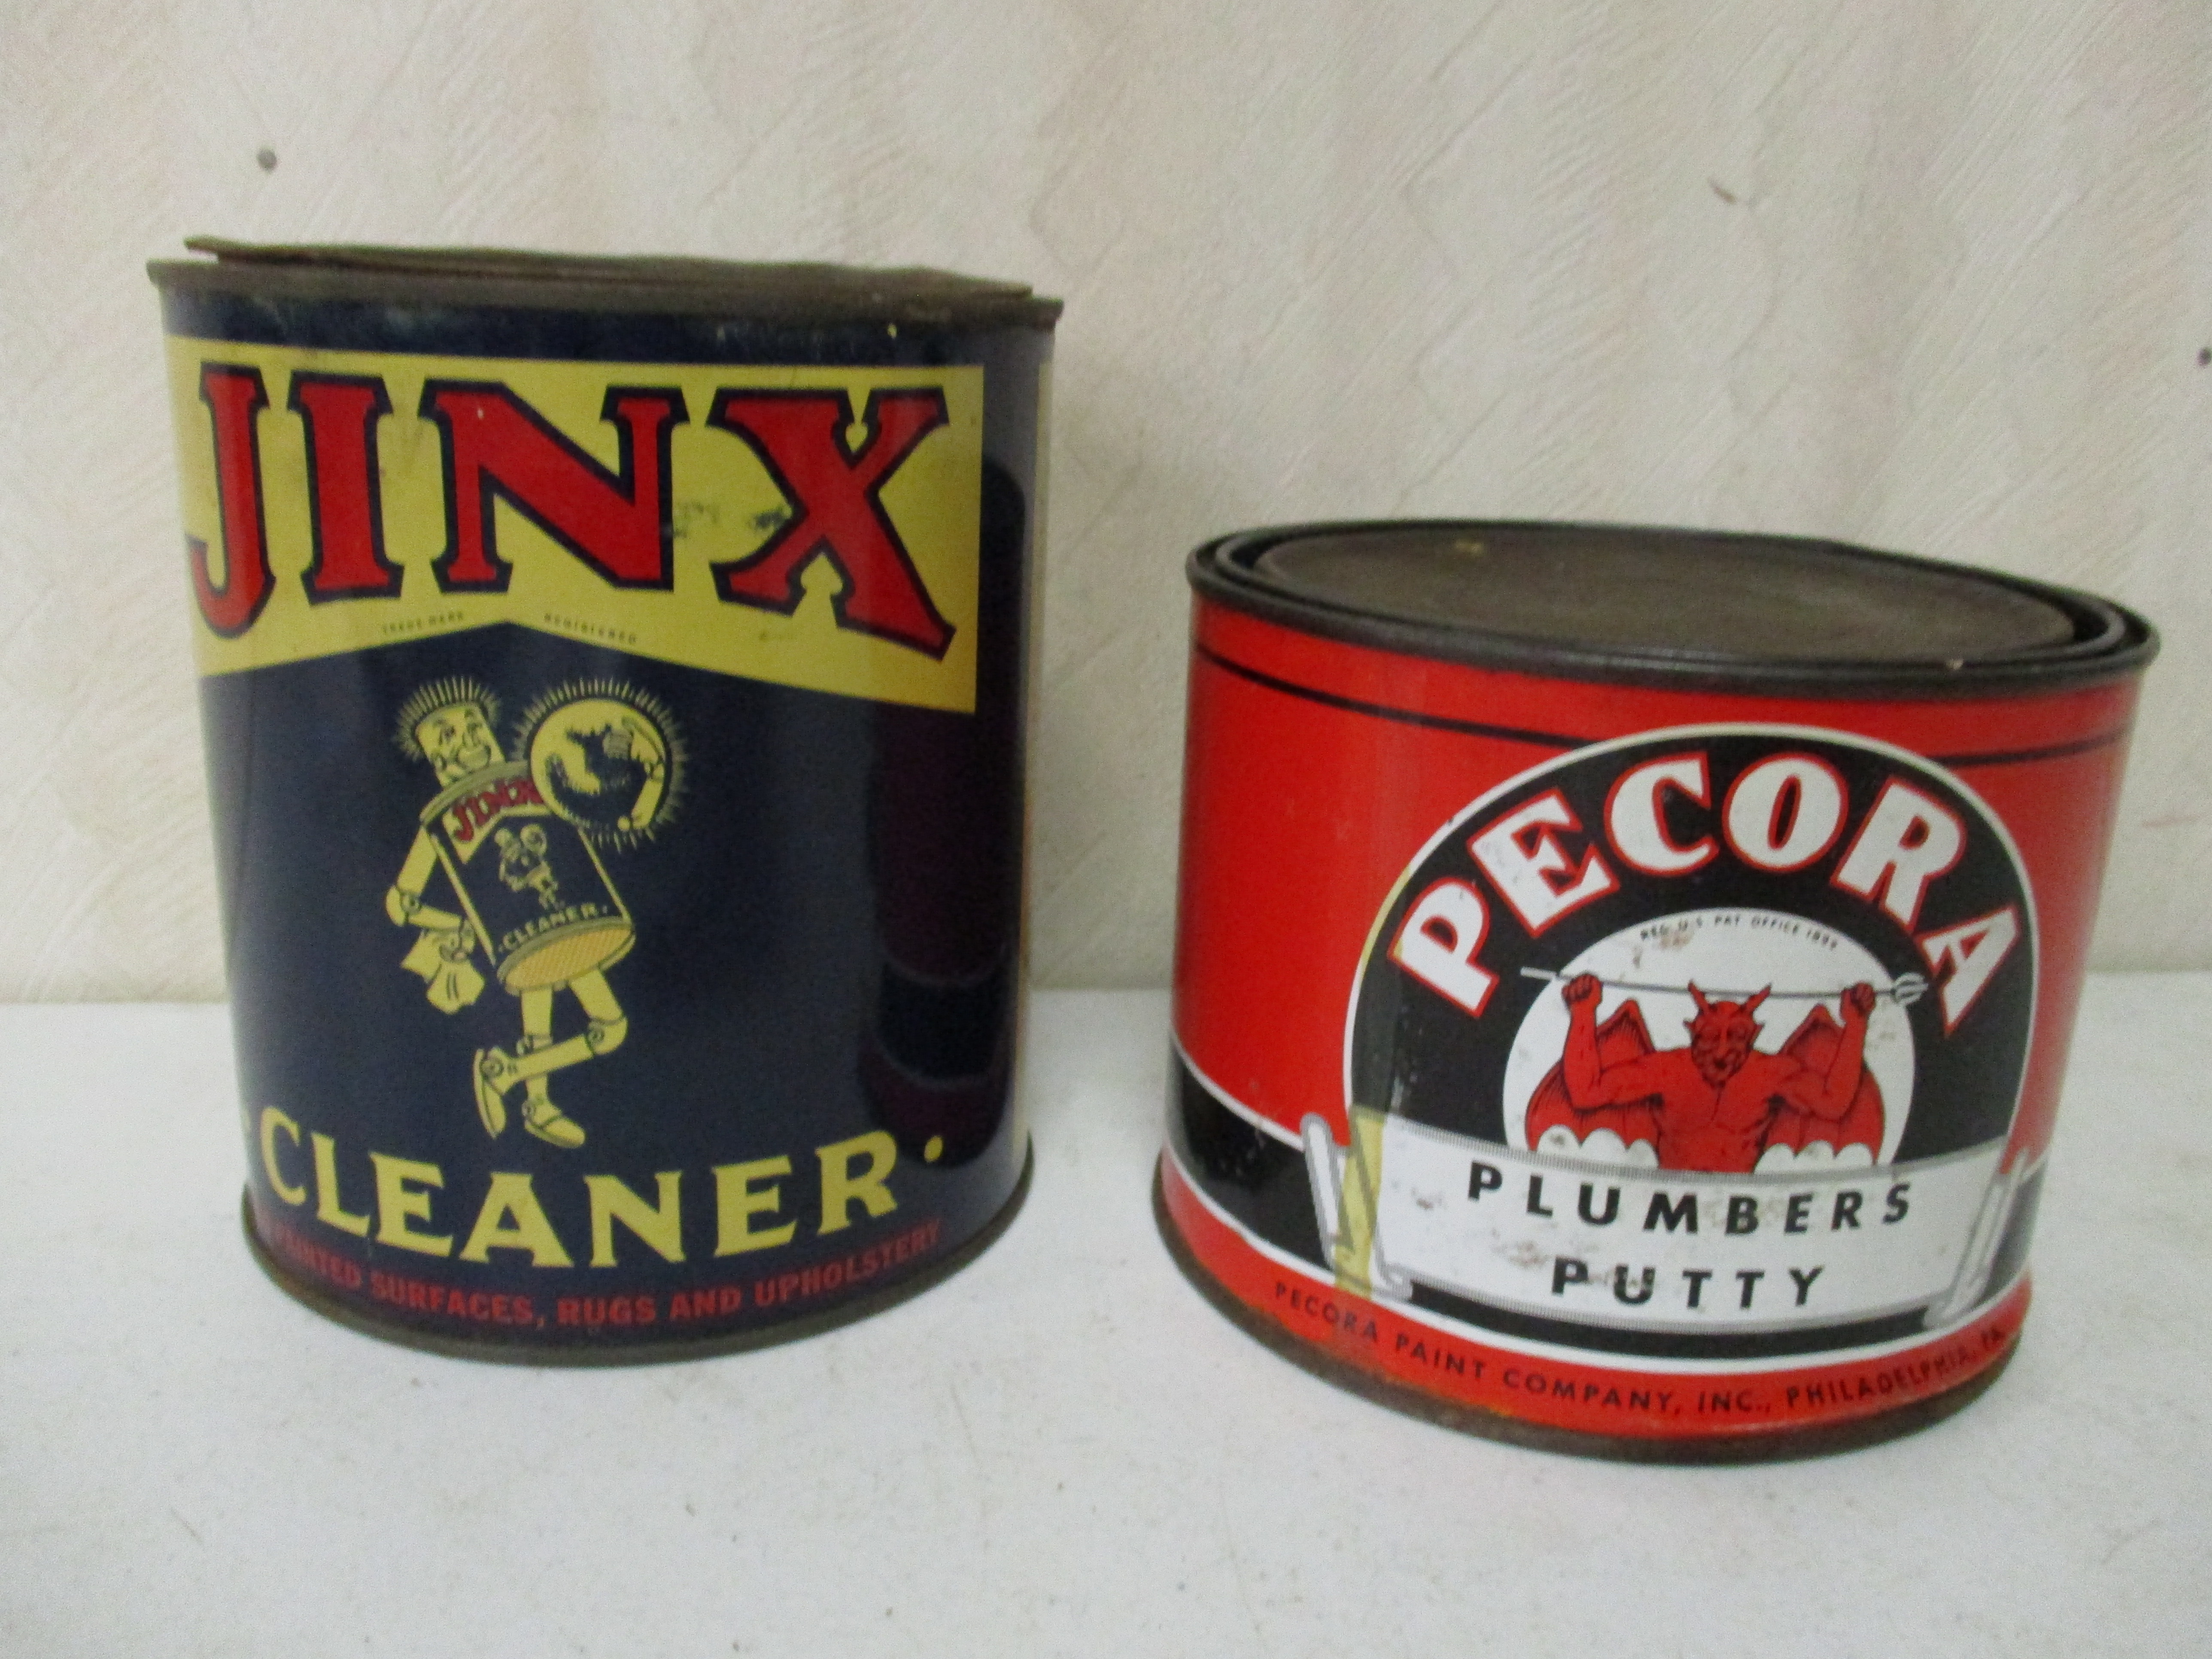 Lot 100: Jinx Cleaner And Pecora Pluimber's Putty Cans